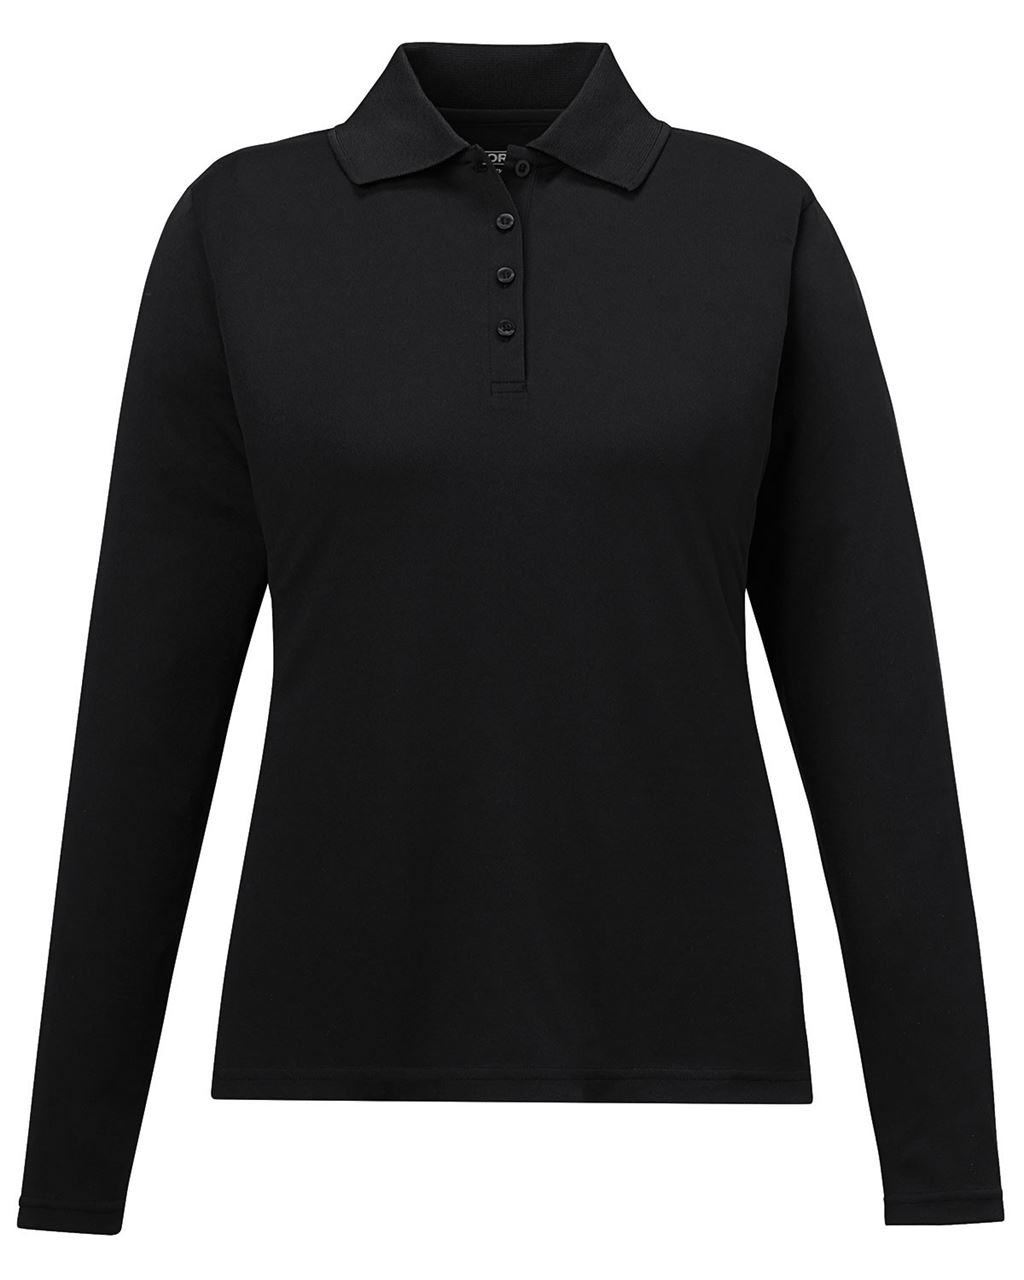 Picture of CORE365 Women's Pinnacle Performance Long-Sleeve Piqué Polo